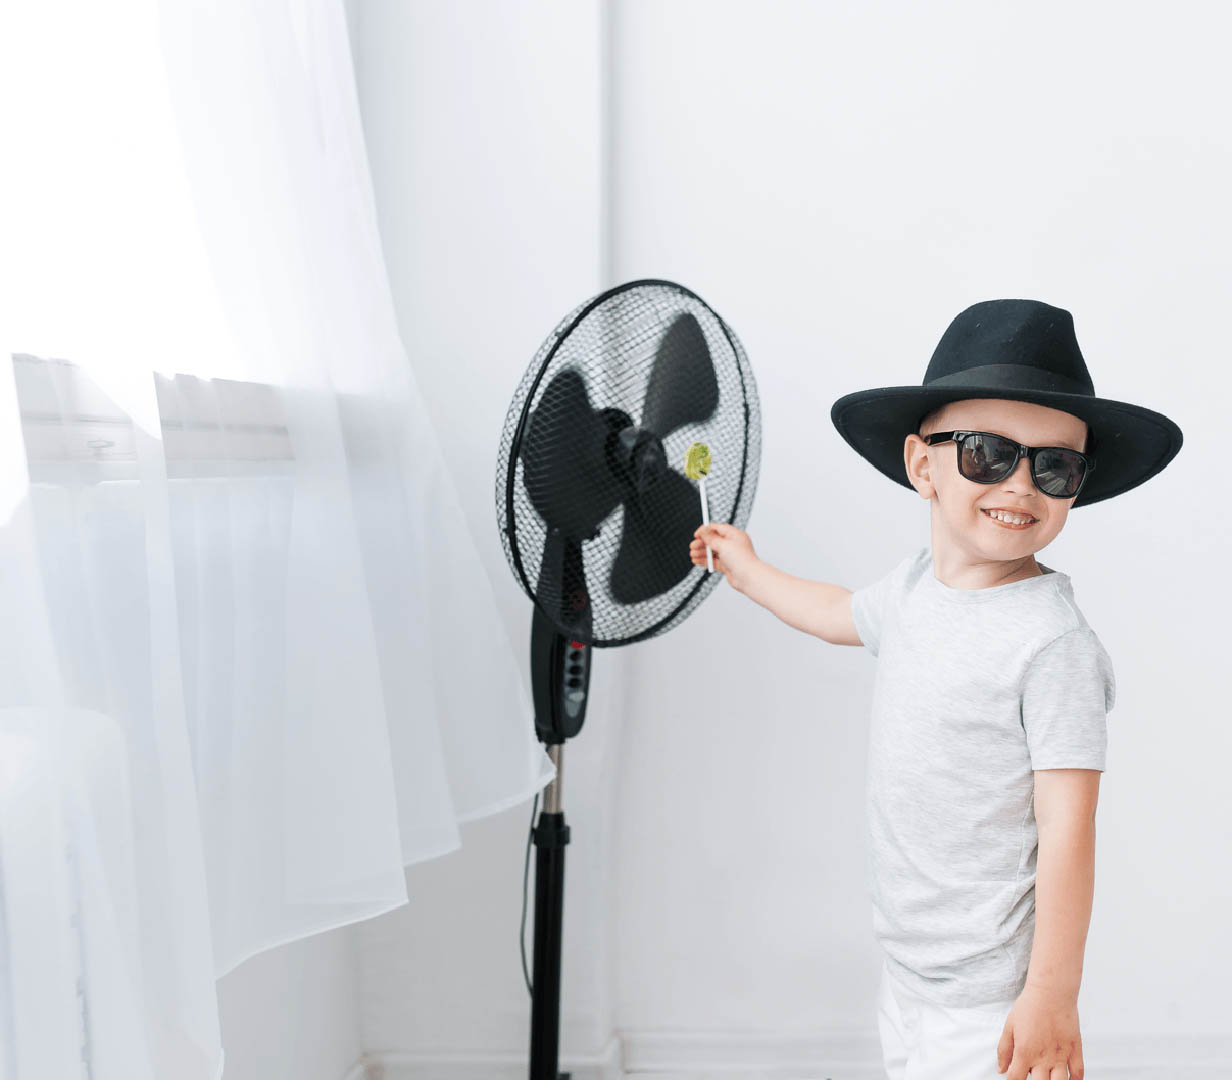 Home Hacks to Reduce the Heat Little Boy Image